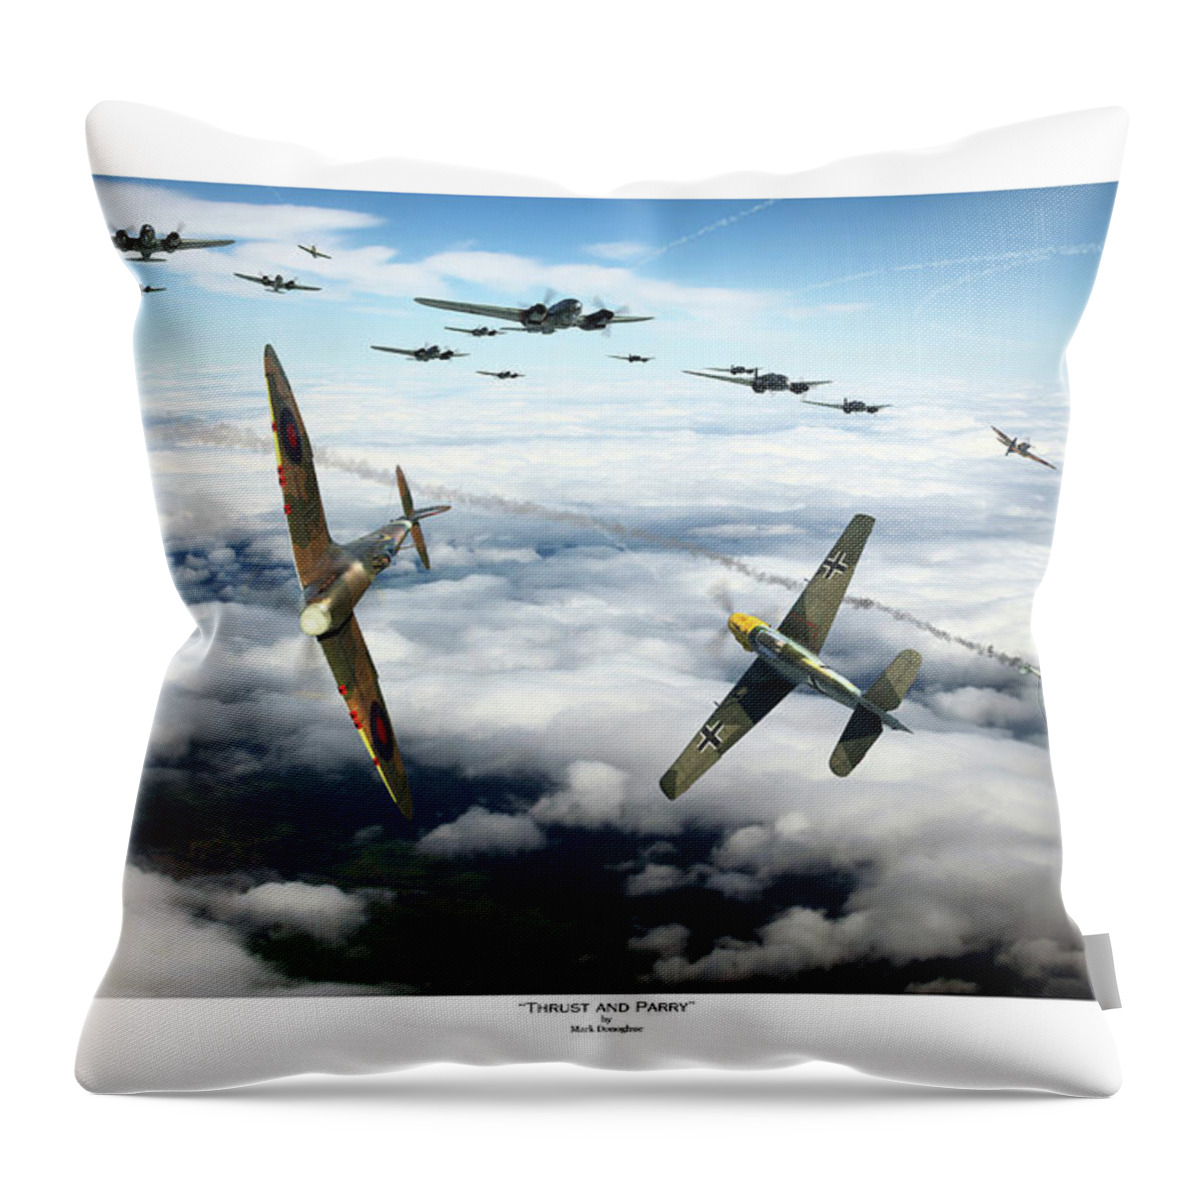 Spitfire Throw Pillow featuring the digital art Thrust and Parry - Titled by Mark Donoghue